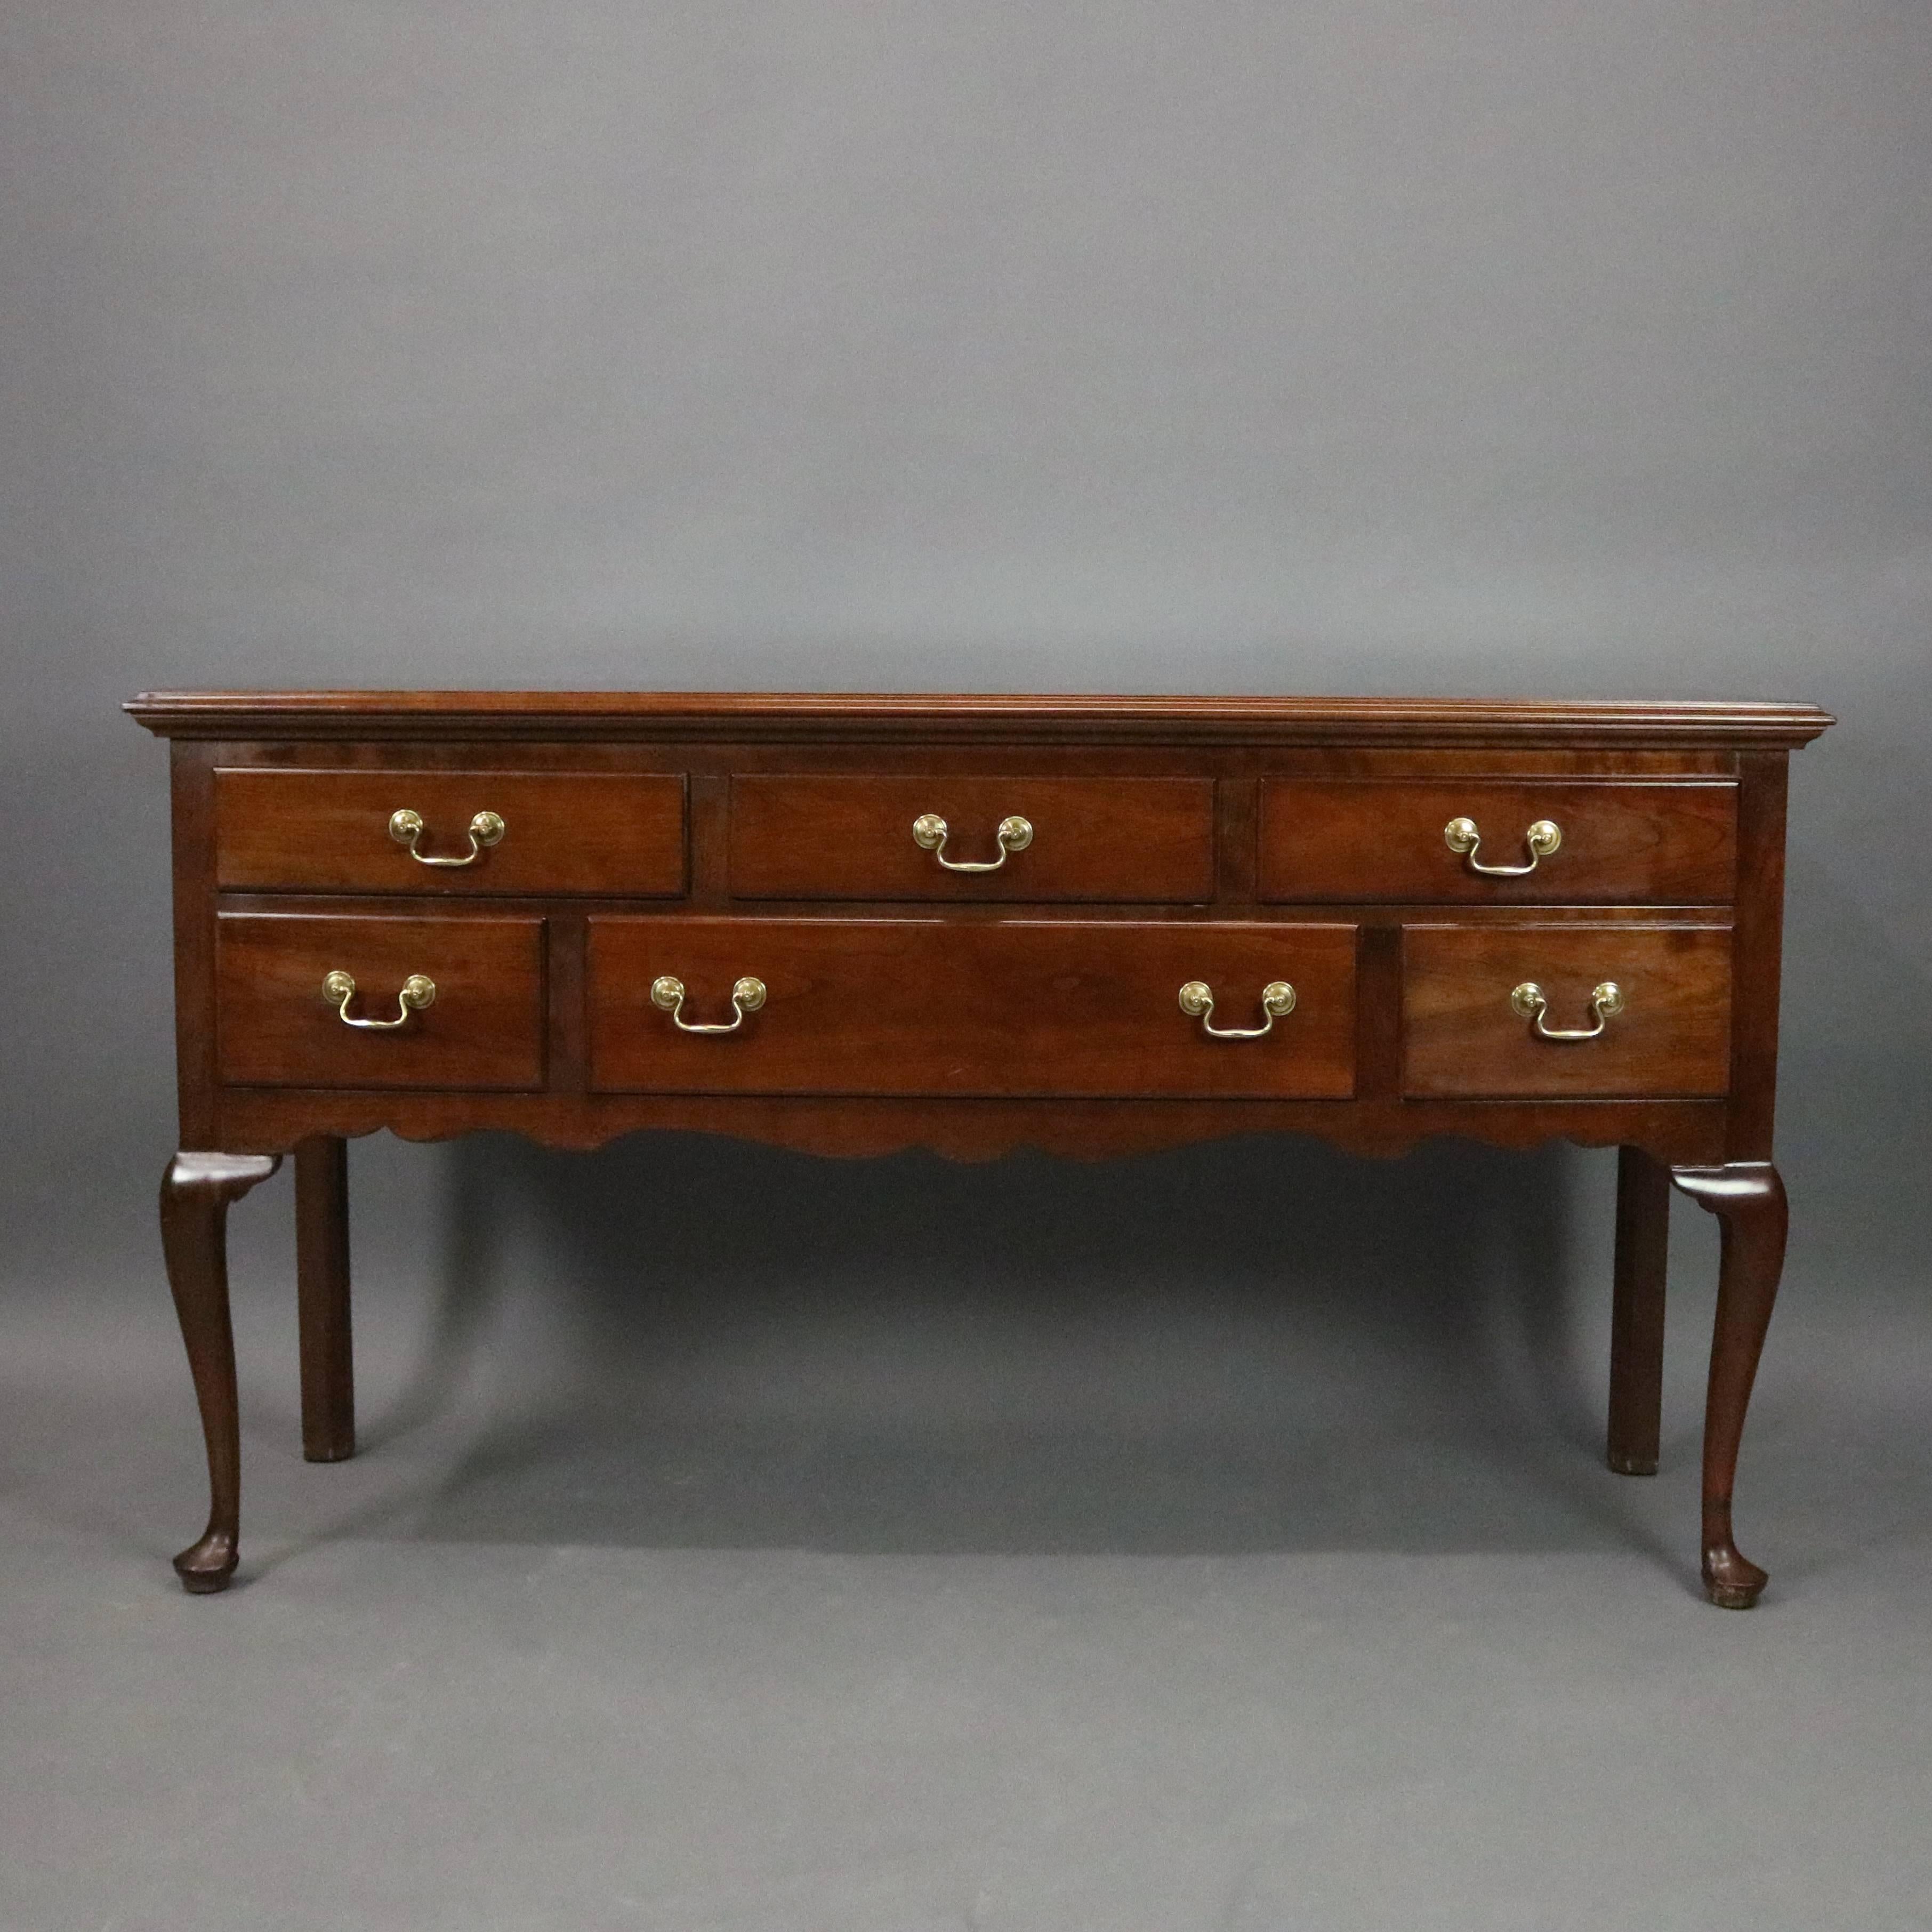 Vintage L. & J.G Stickley Cherry Valley collection server features solid cherry construction with six drawer case atop Queen Anne style legs, Stickley stamp on drawer interior, original paperwork, circa 1985.

Measures: 34.5" H x